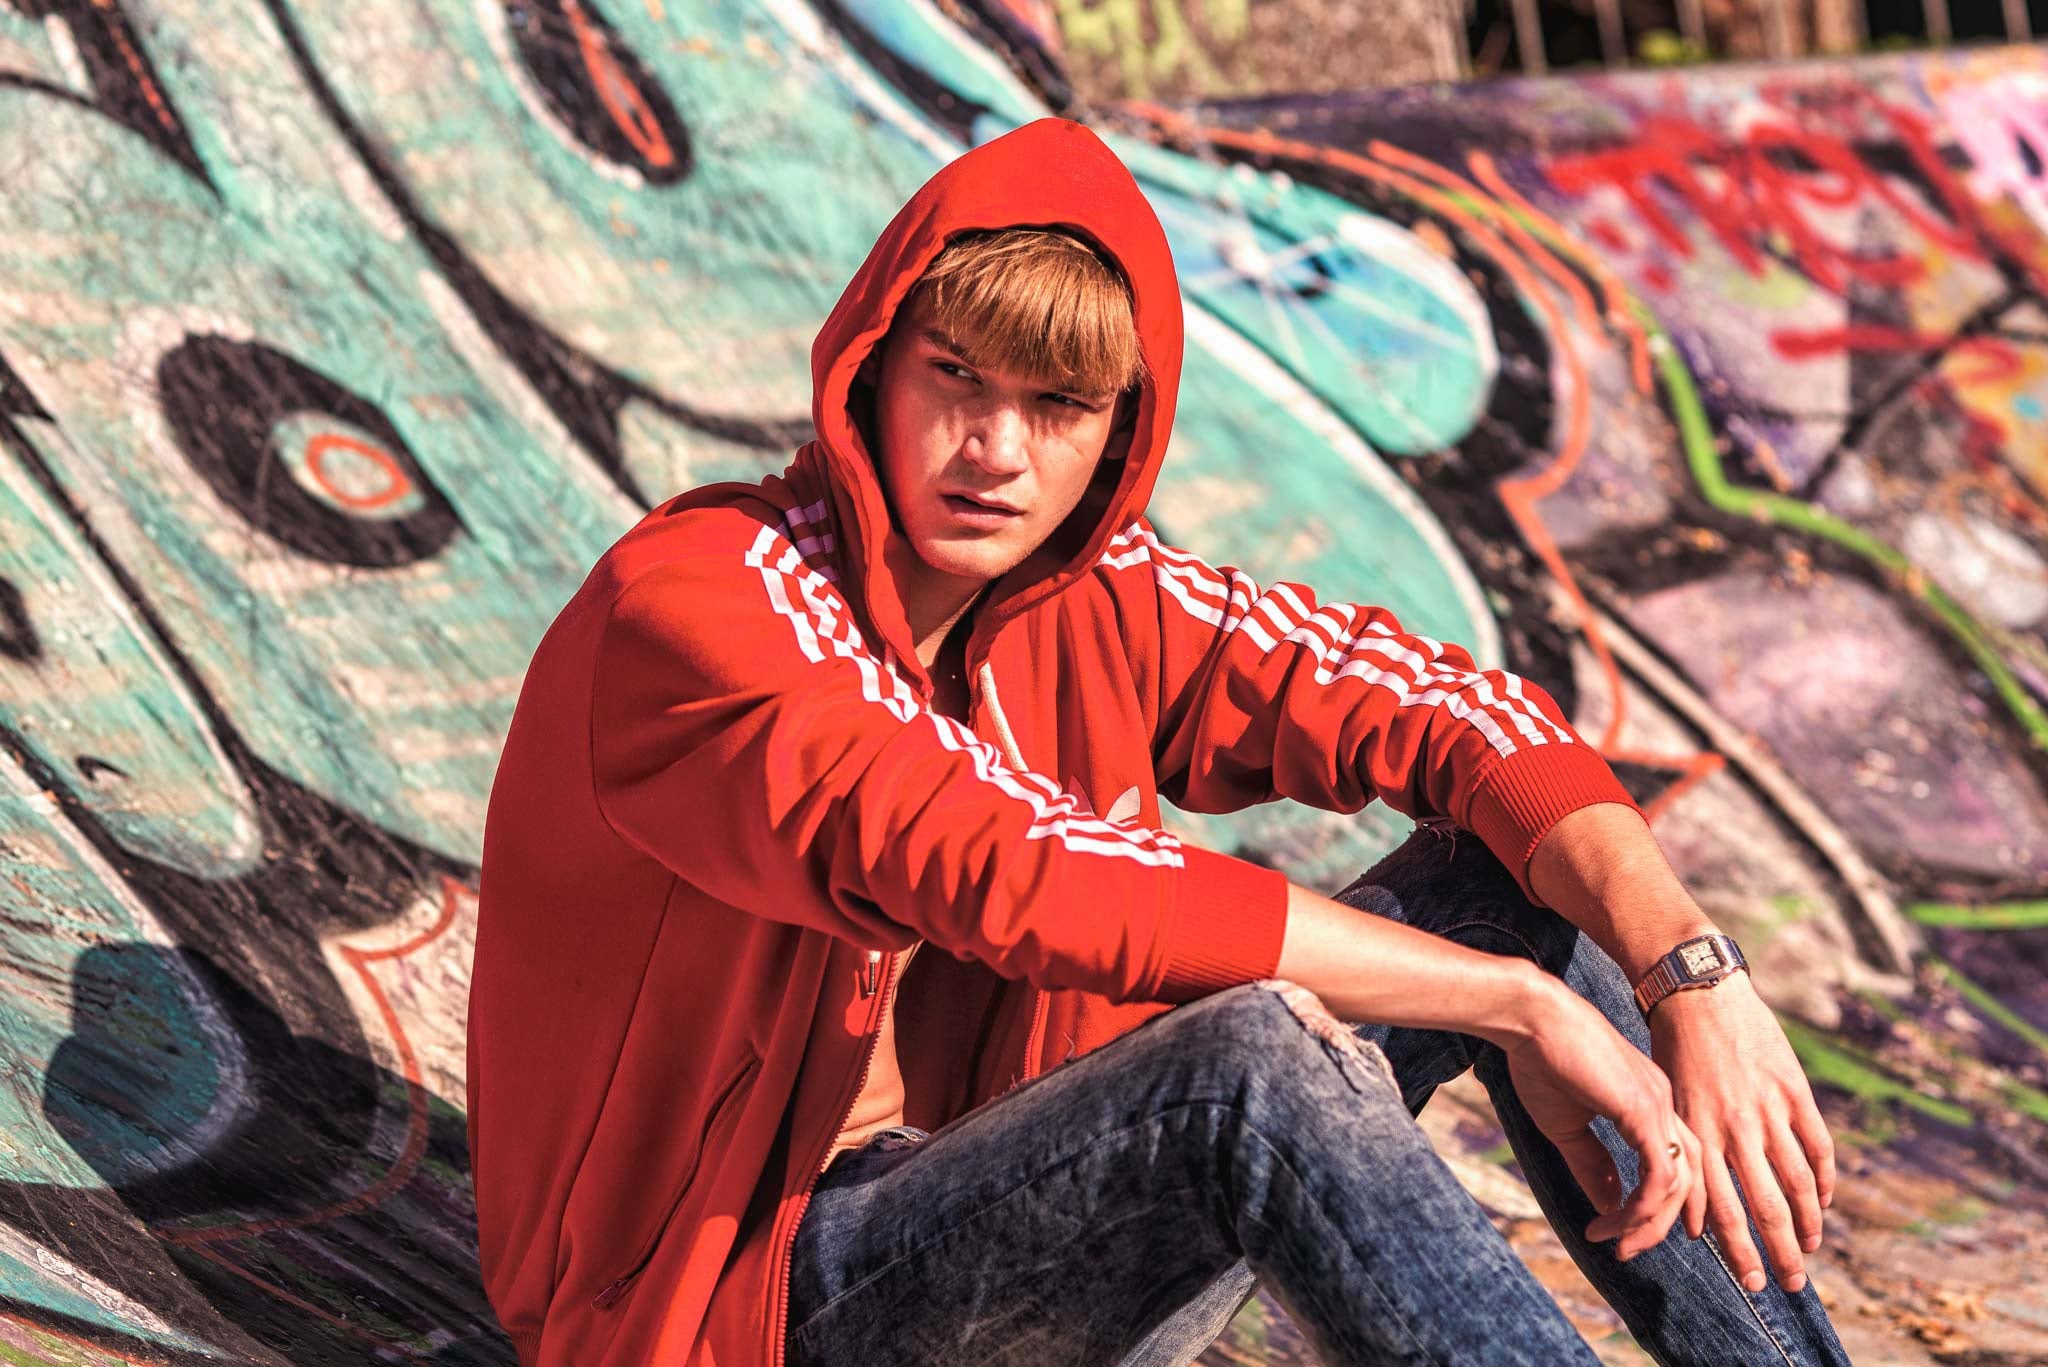 A boy fashion model sits on a skate ramp in a skate park with graffiti in the background. He wears a red tracksuit top and jeans, with the sun shining in his eyes as he looks away from the camera with an inquisitive look. Captured by Wright Content, a model photographer in London.